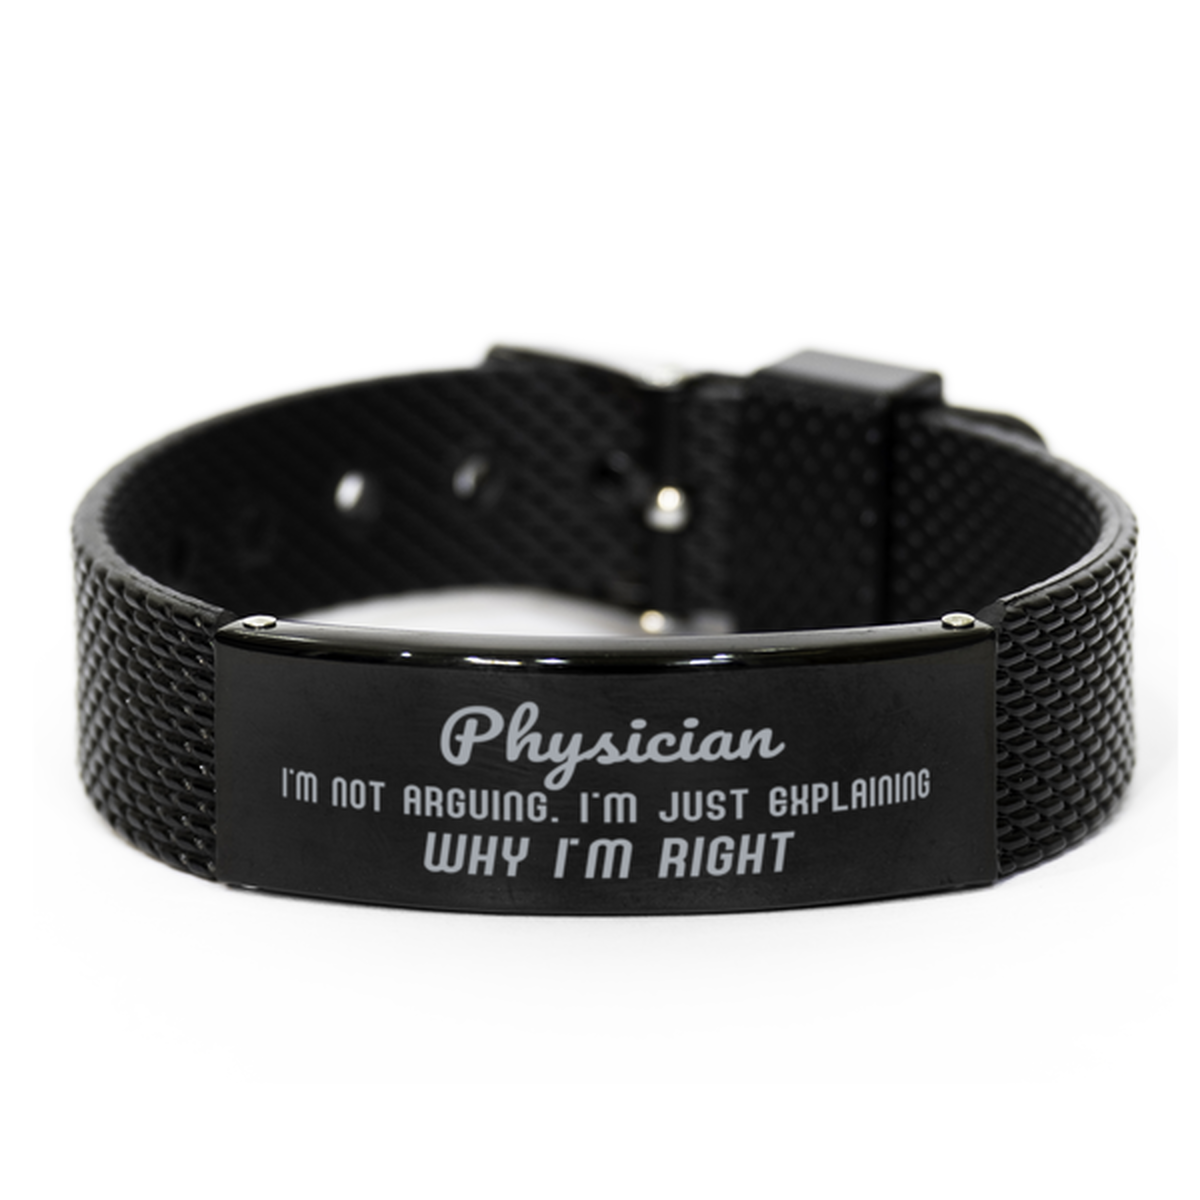 Physician I'm not Arguing. I'm Just Explaining Why I'm RIGHT Black Shark Mesh Bracelet, Funny Saying Quote Physician Gifts For Physician Graduation Birthday Christmas Gifts for Men Women Coworker